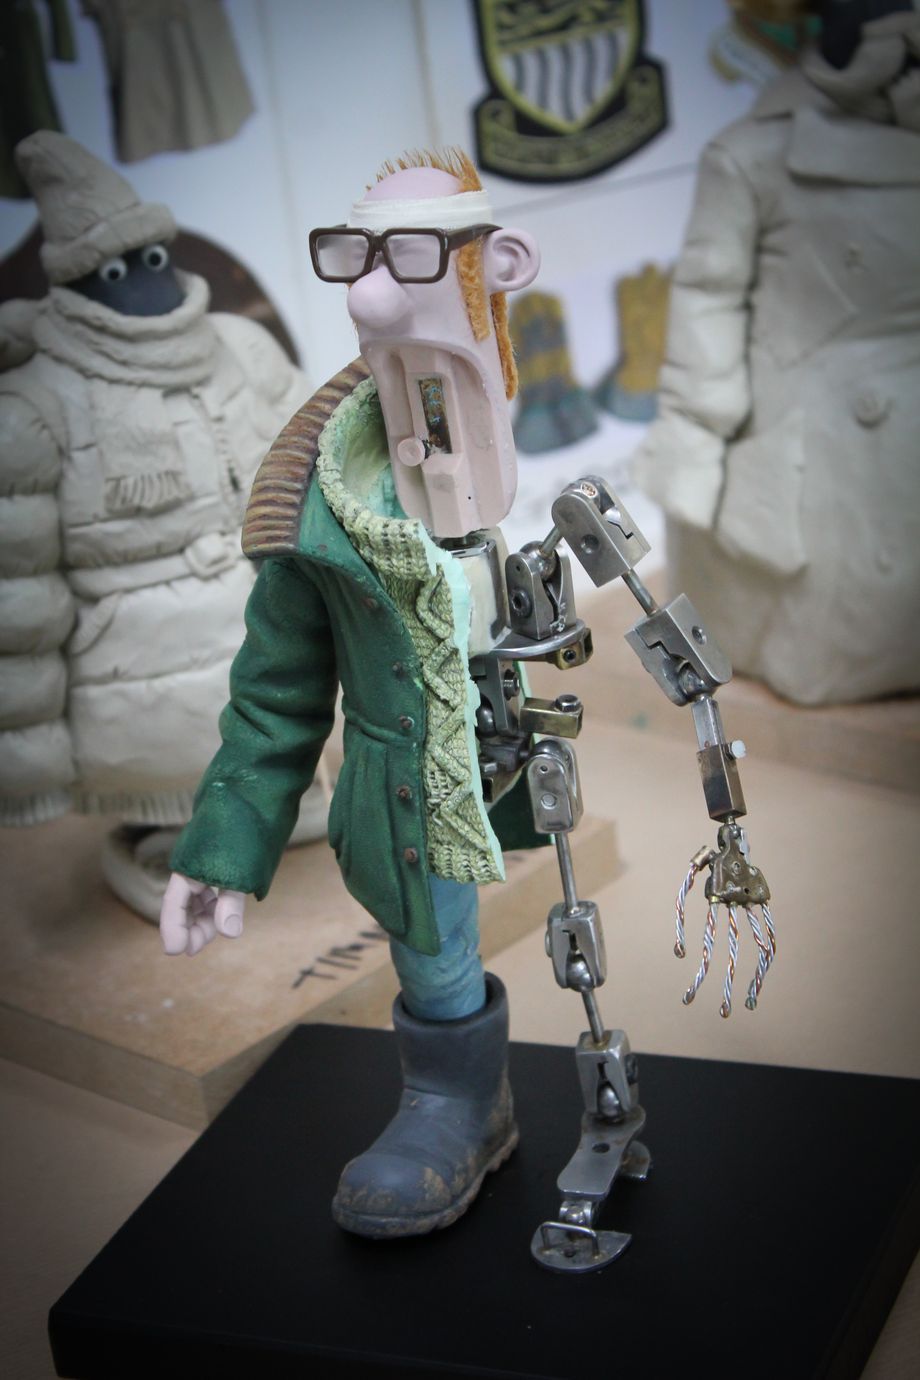 a Farmer puppet from 'Shaun the Sheep' showing part of its armature